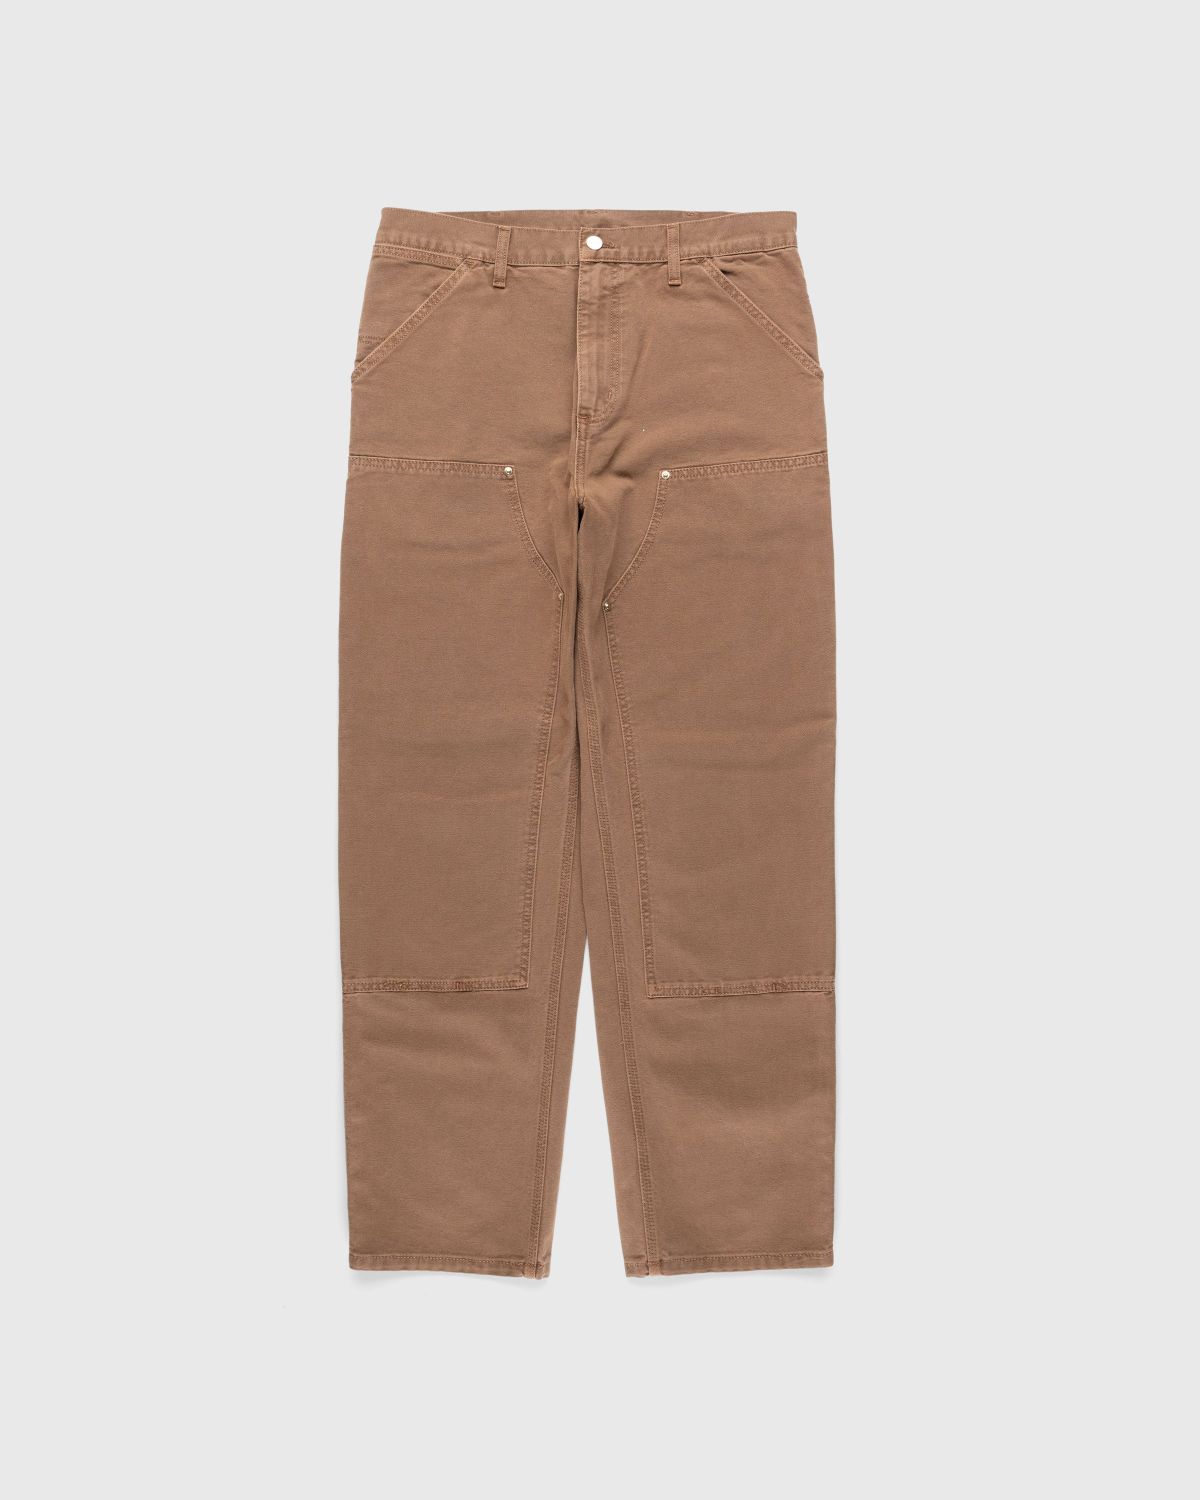 Carhartt WIP – Double Knee Pant Red - Pants - Red - Image 1